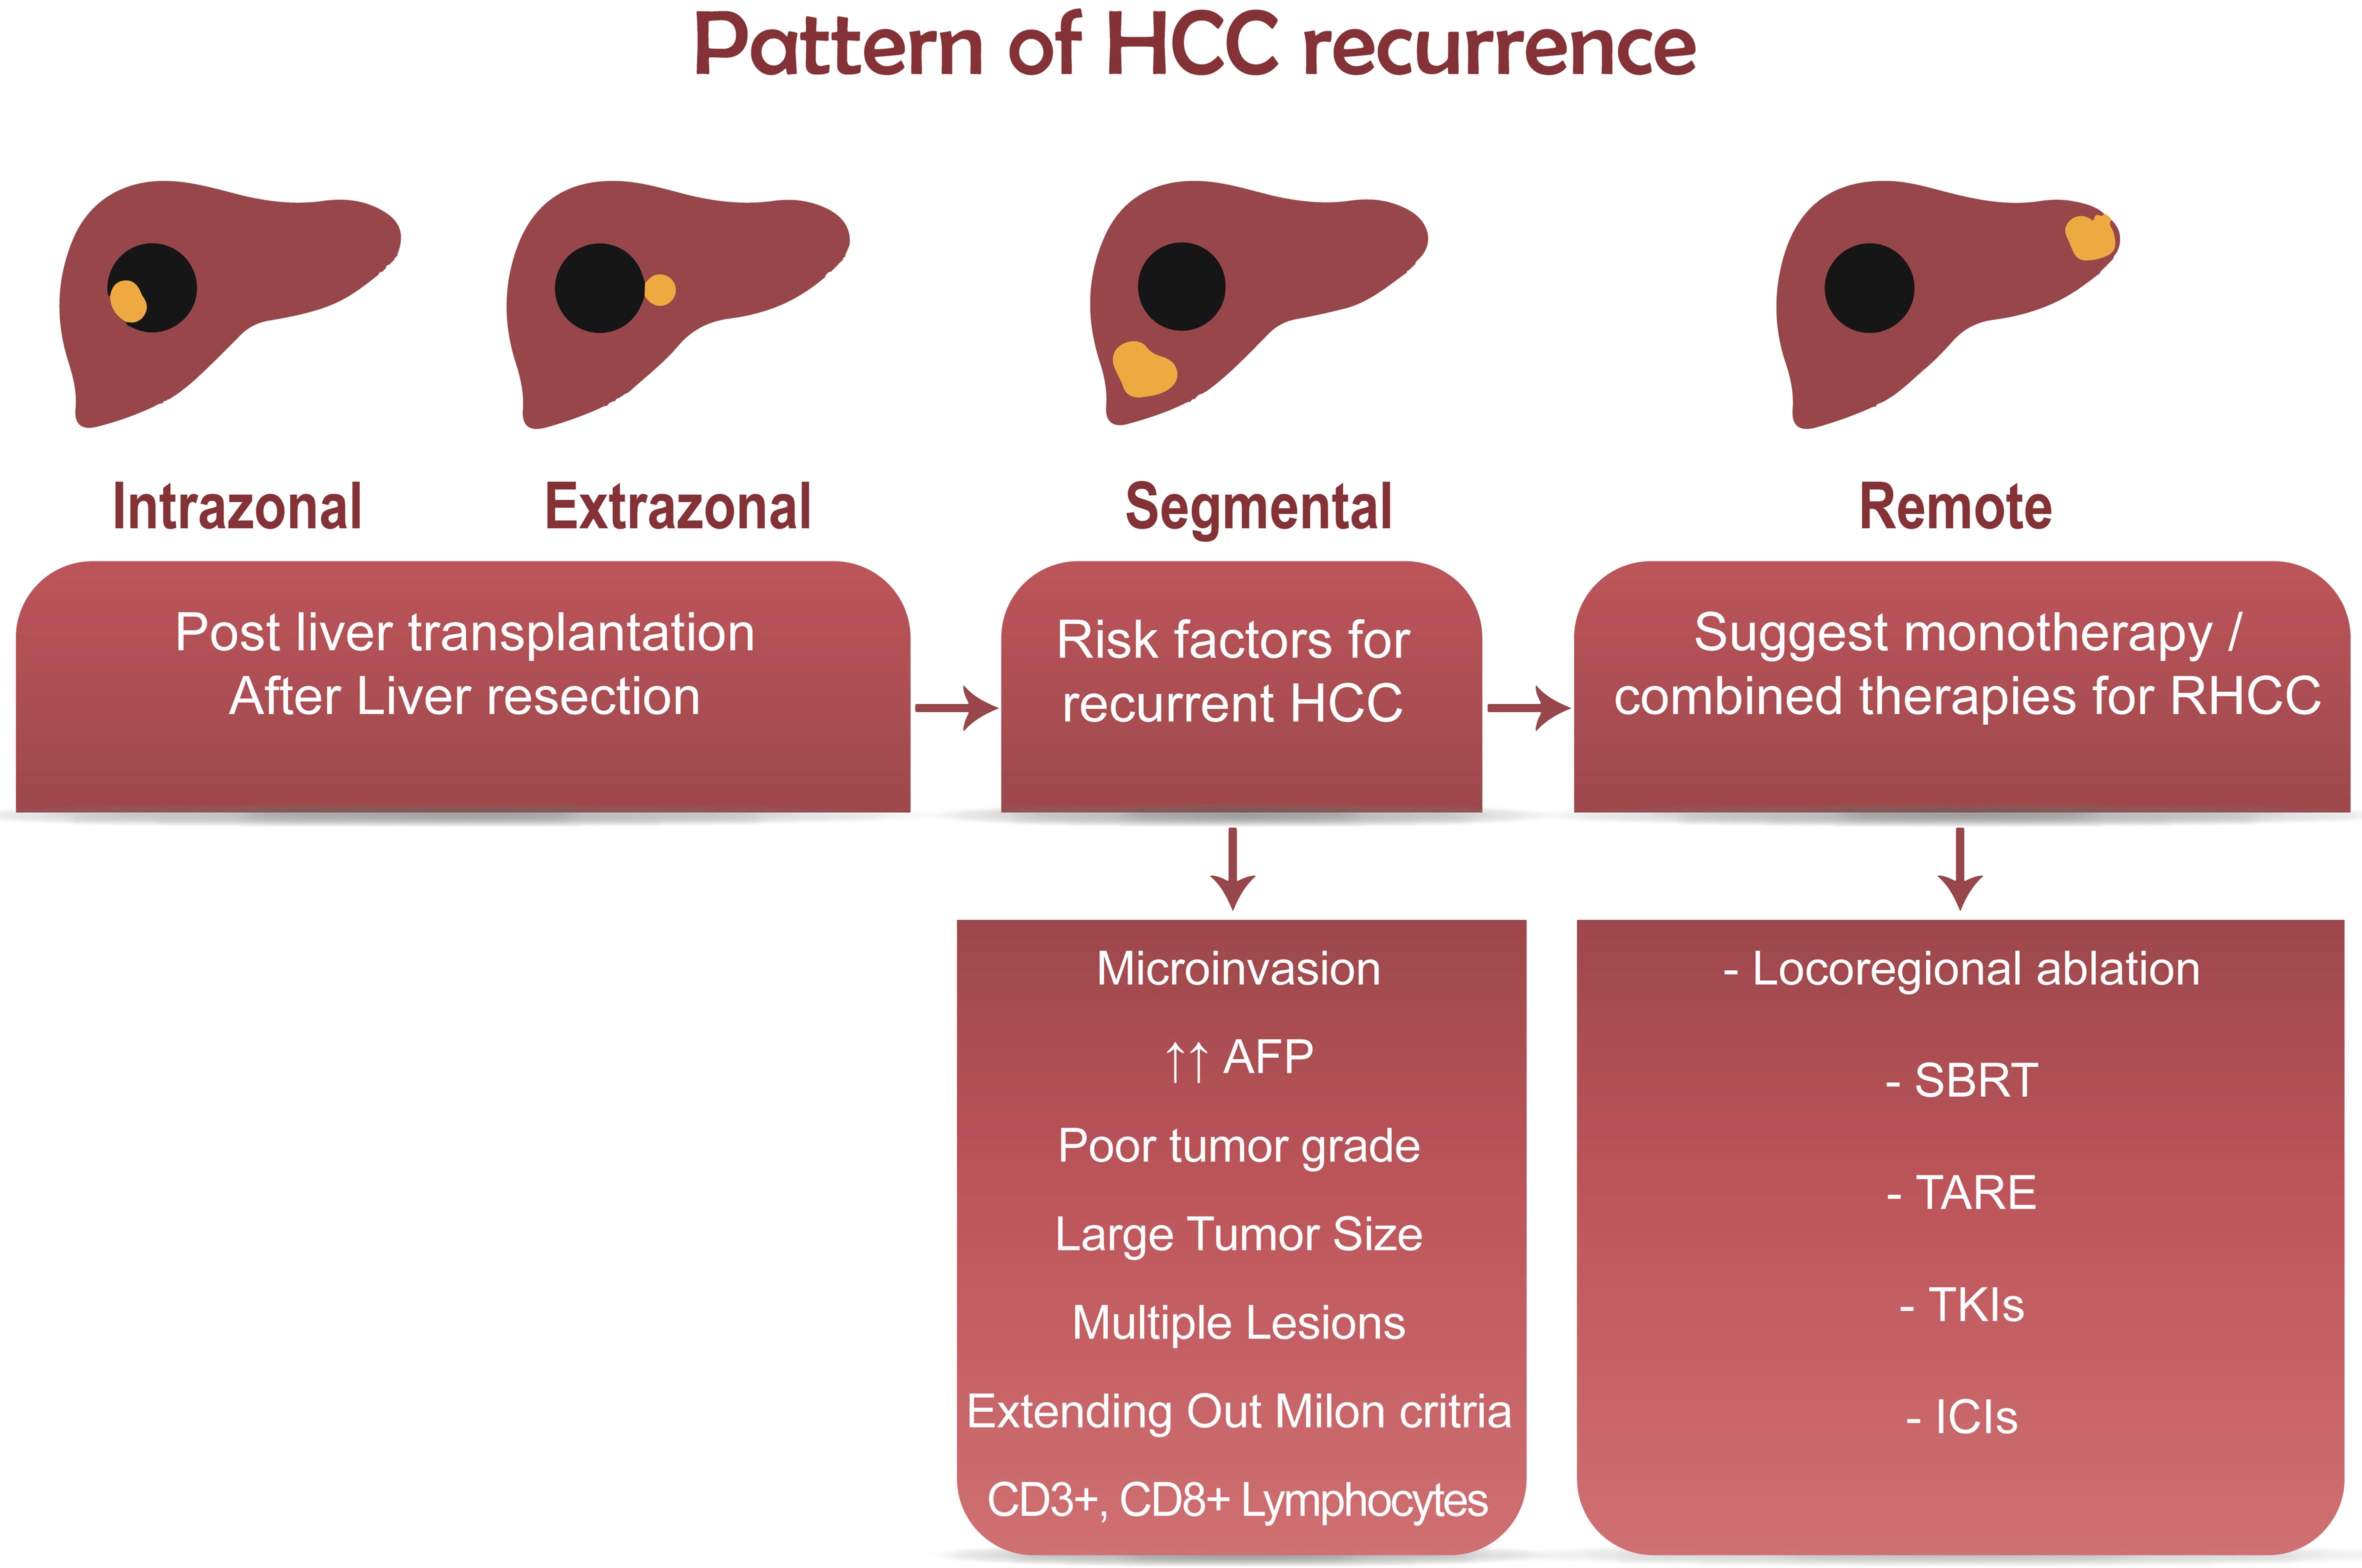 The patterns of HCC recurrence, risk factors and suggested therapies.